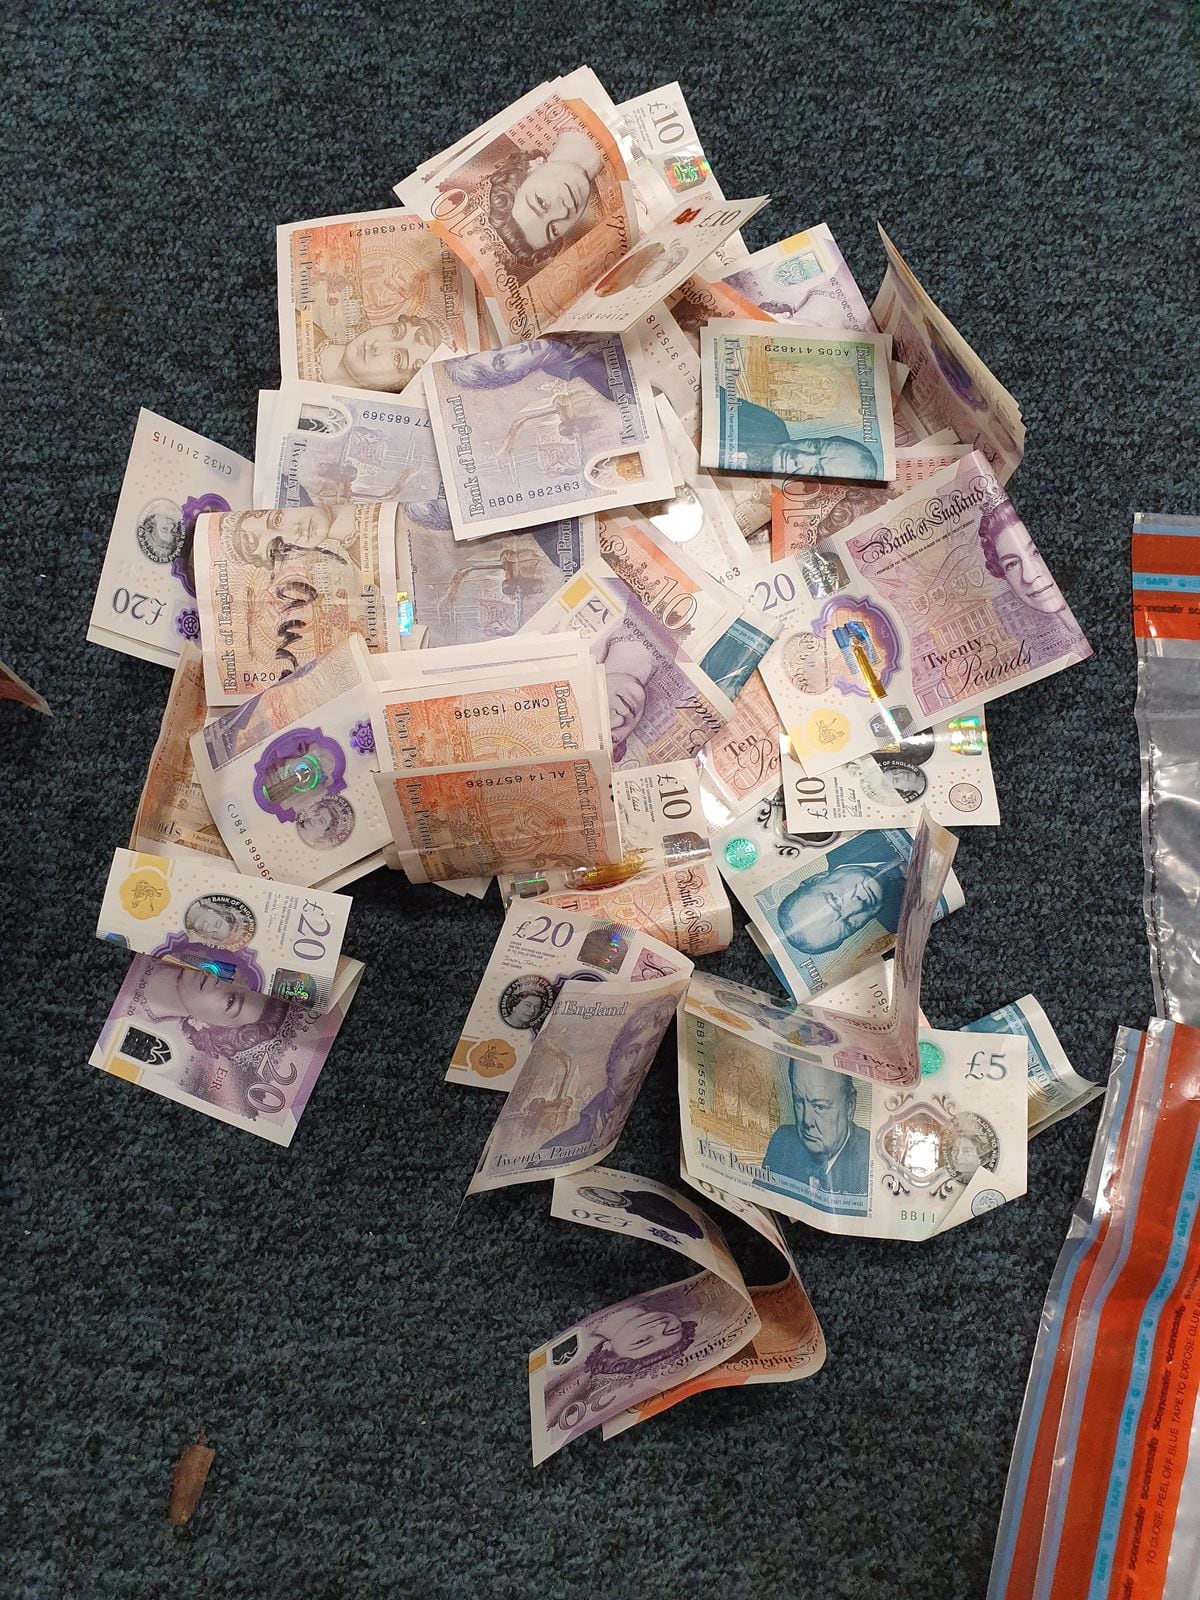 Police recovered cash in Heath Town